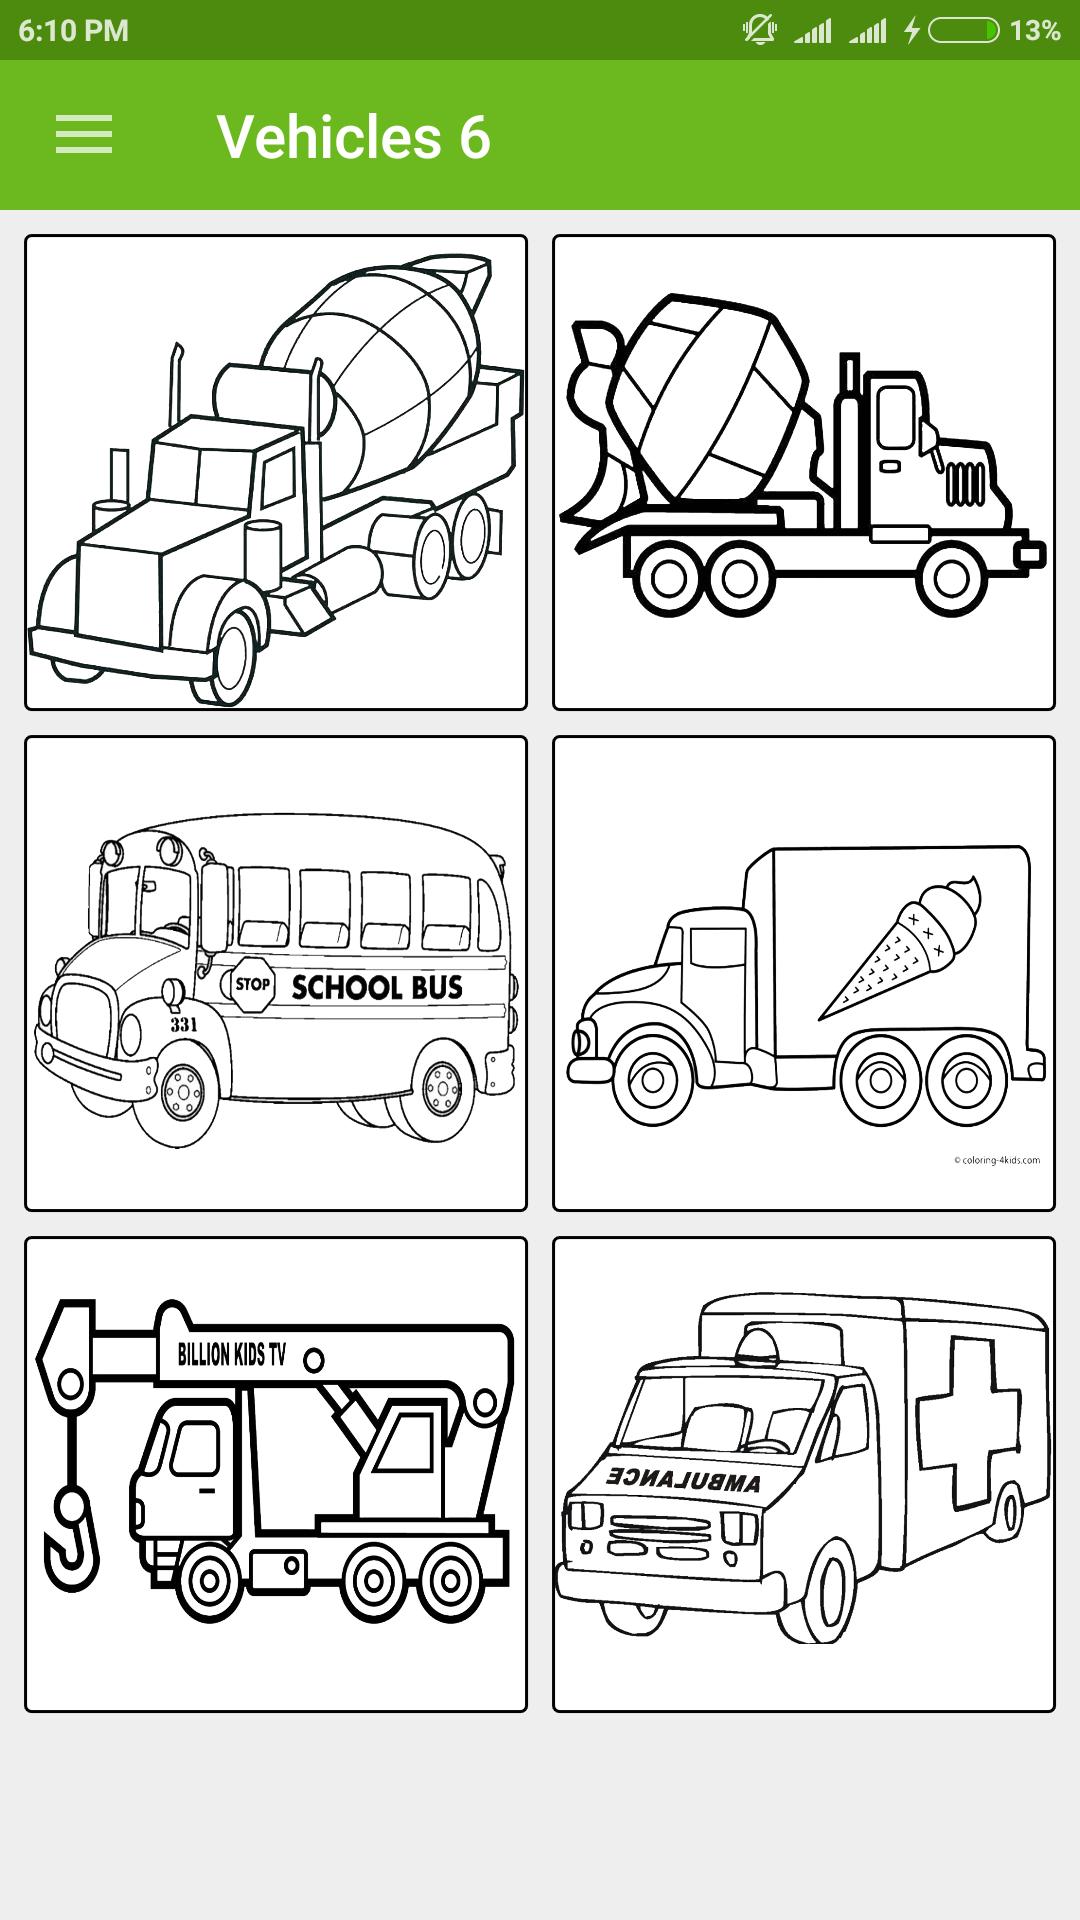 Vehicles Coloring Pages for Kids for Android - APK Download